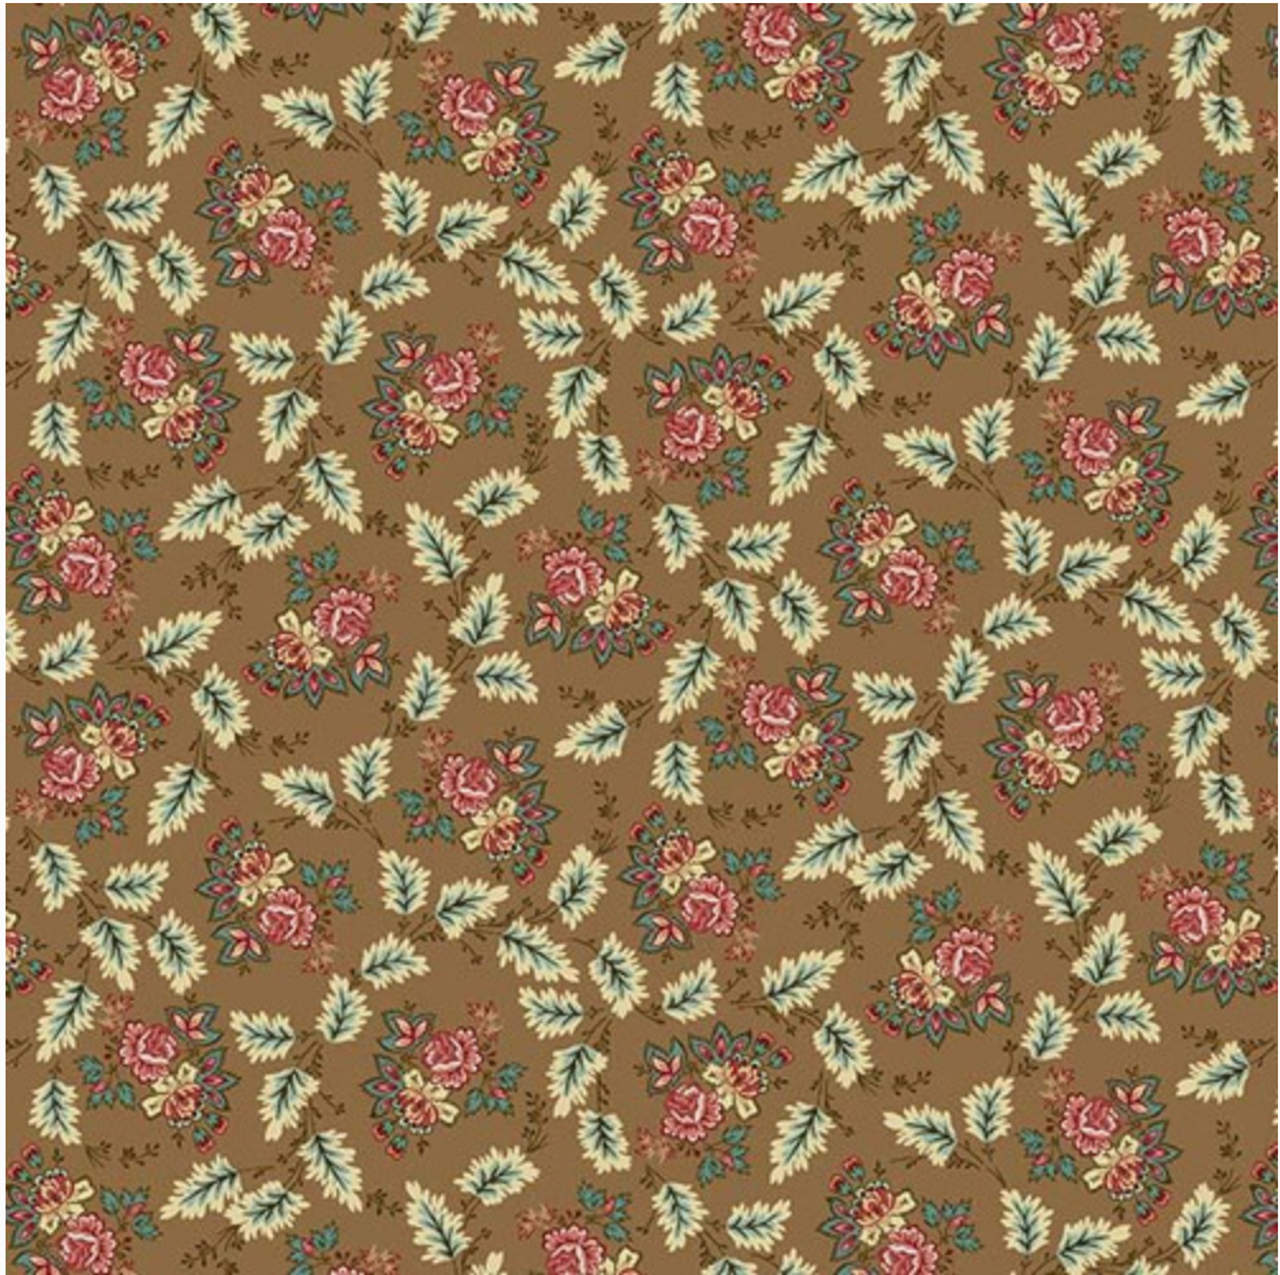 Henry Glass Lille Floral Leaf Caramel Fabric By The Yard